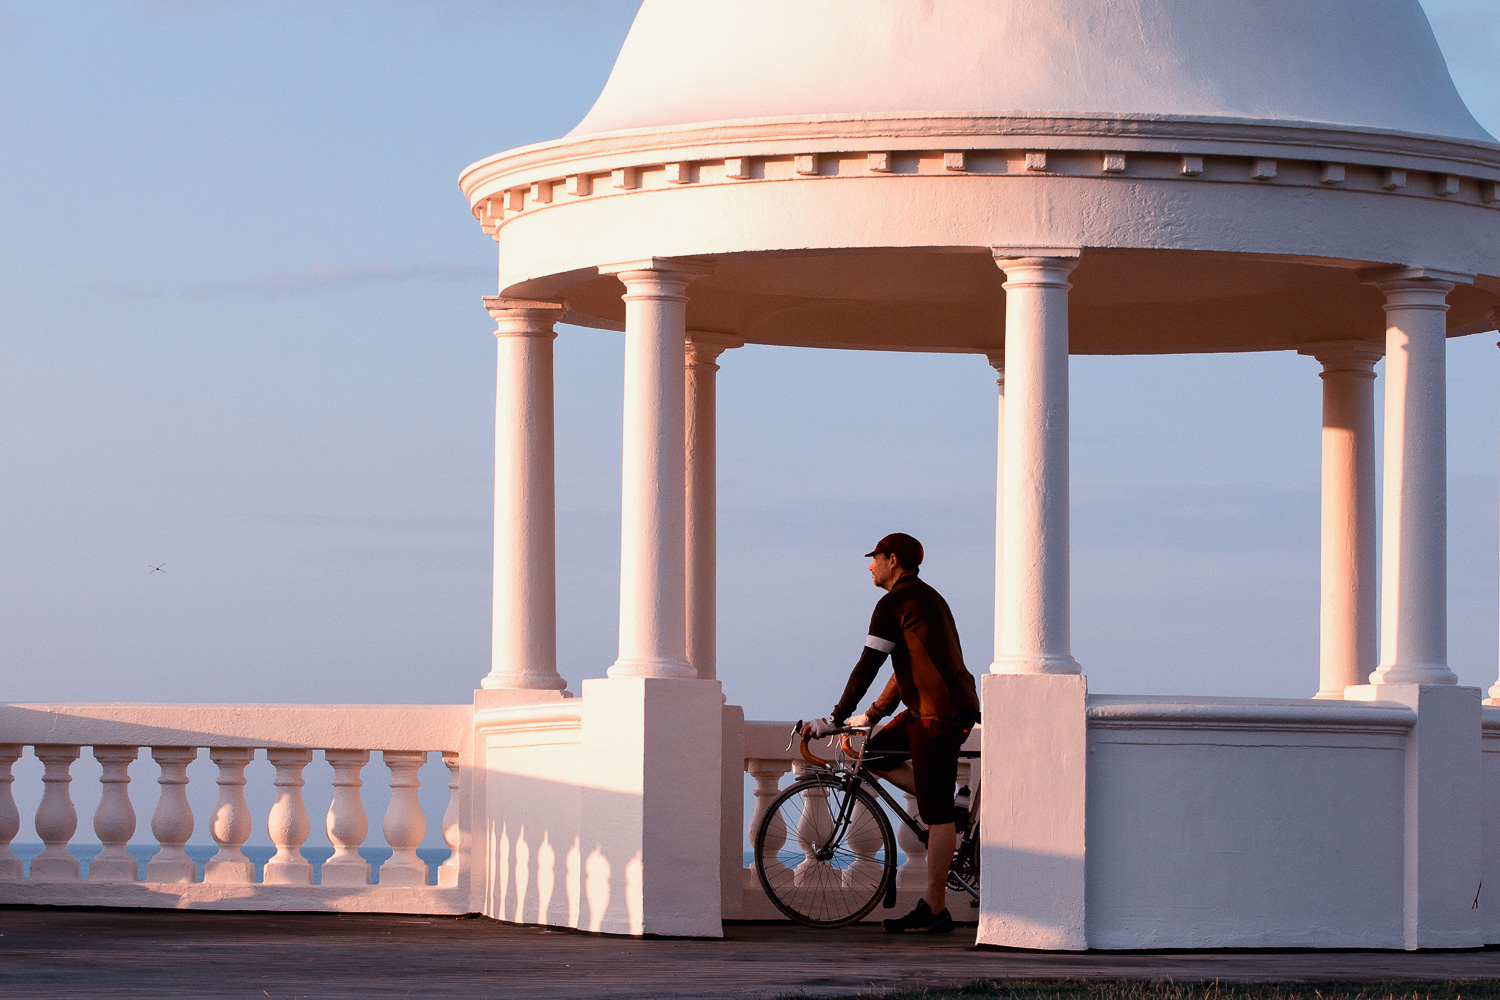 Bicycles in the Landscape: Cyclist and photographer Roff Smith poses with his touring bicycle inside the Tuscan columned dome of the King George V Colonnade at Bexhill on Sea. The Grade II listed monument was built in 1911 to commemorate the coronation of King George V. Its neoclassical lines, balustrades, dome and Tuscan columns and the Union Jack seemed a perfect setting for a series of images celebrating the beauty of a British-built classic touring bicycle